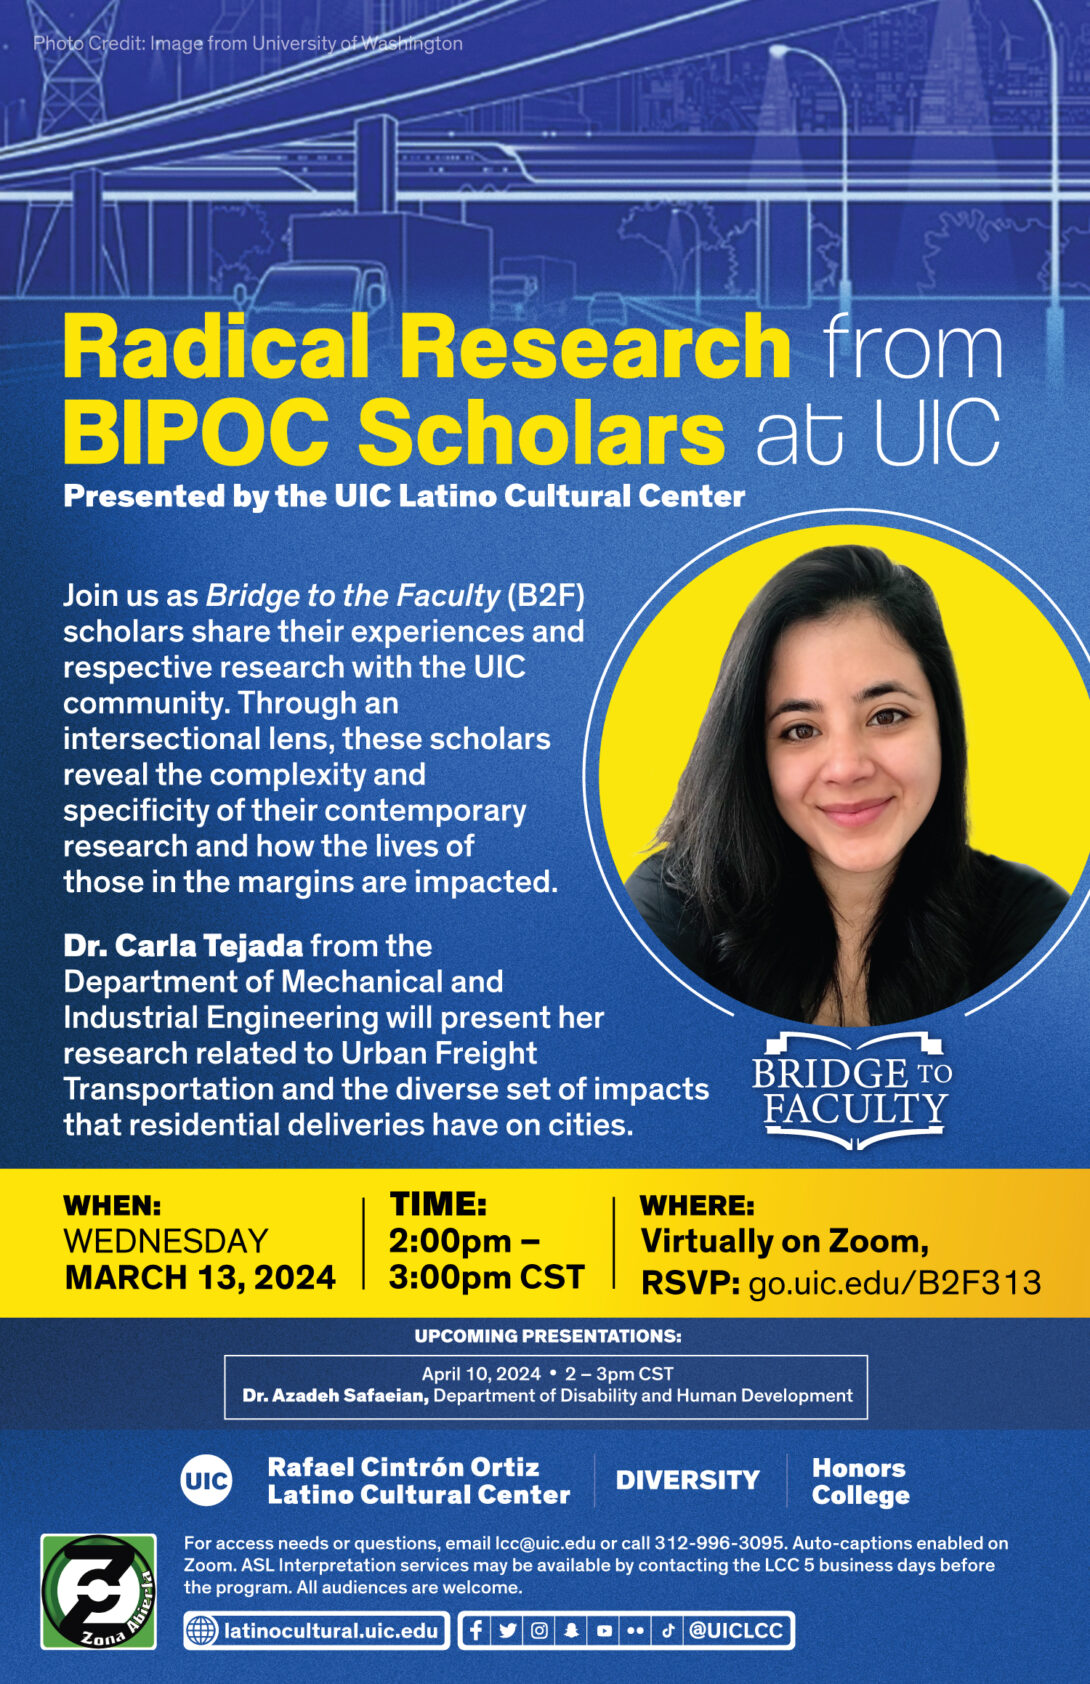 blue background on the whole poster with yellow text, photo of dr. carla tejada in a circle with a yellow background. carla has long black straight hair and is smiling toward the camera